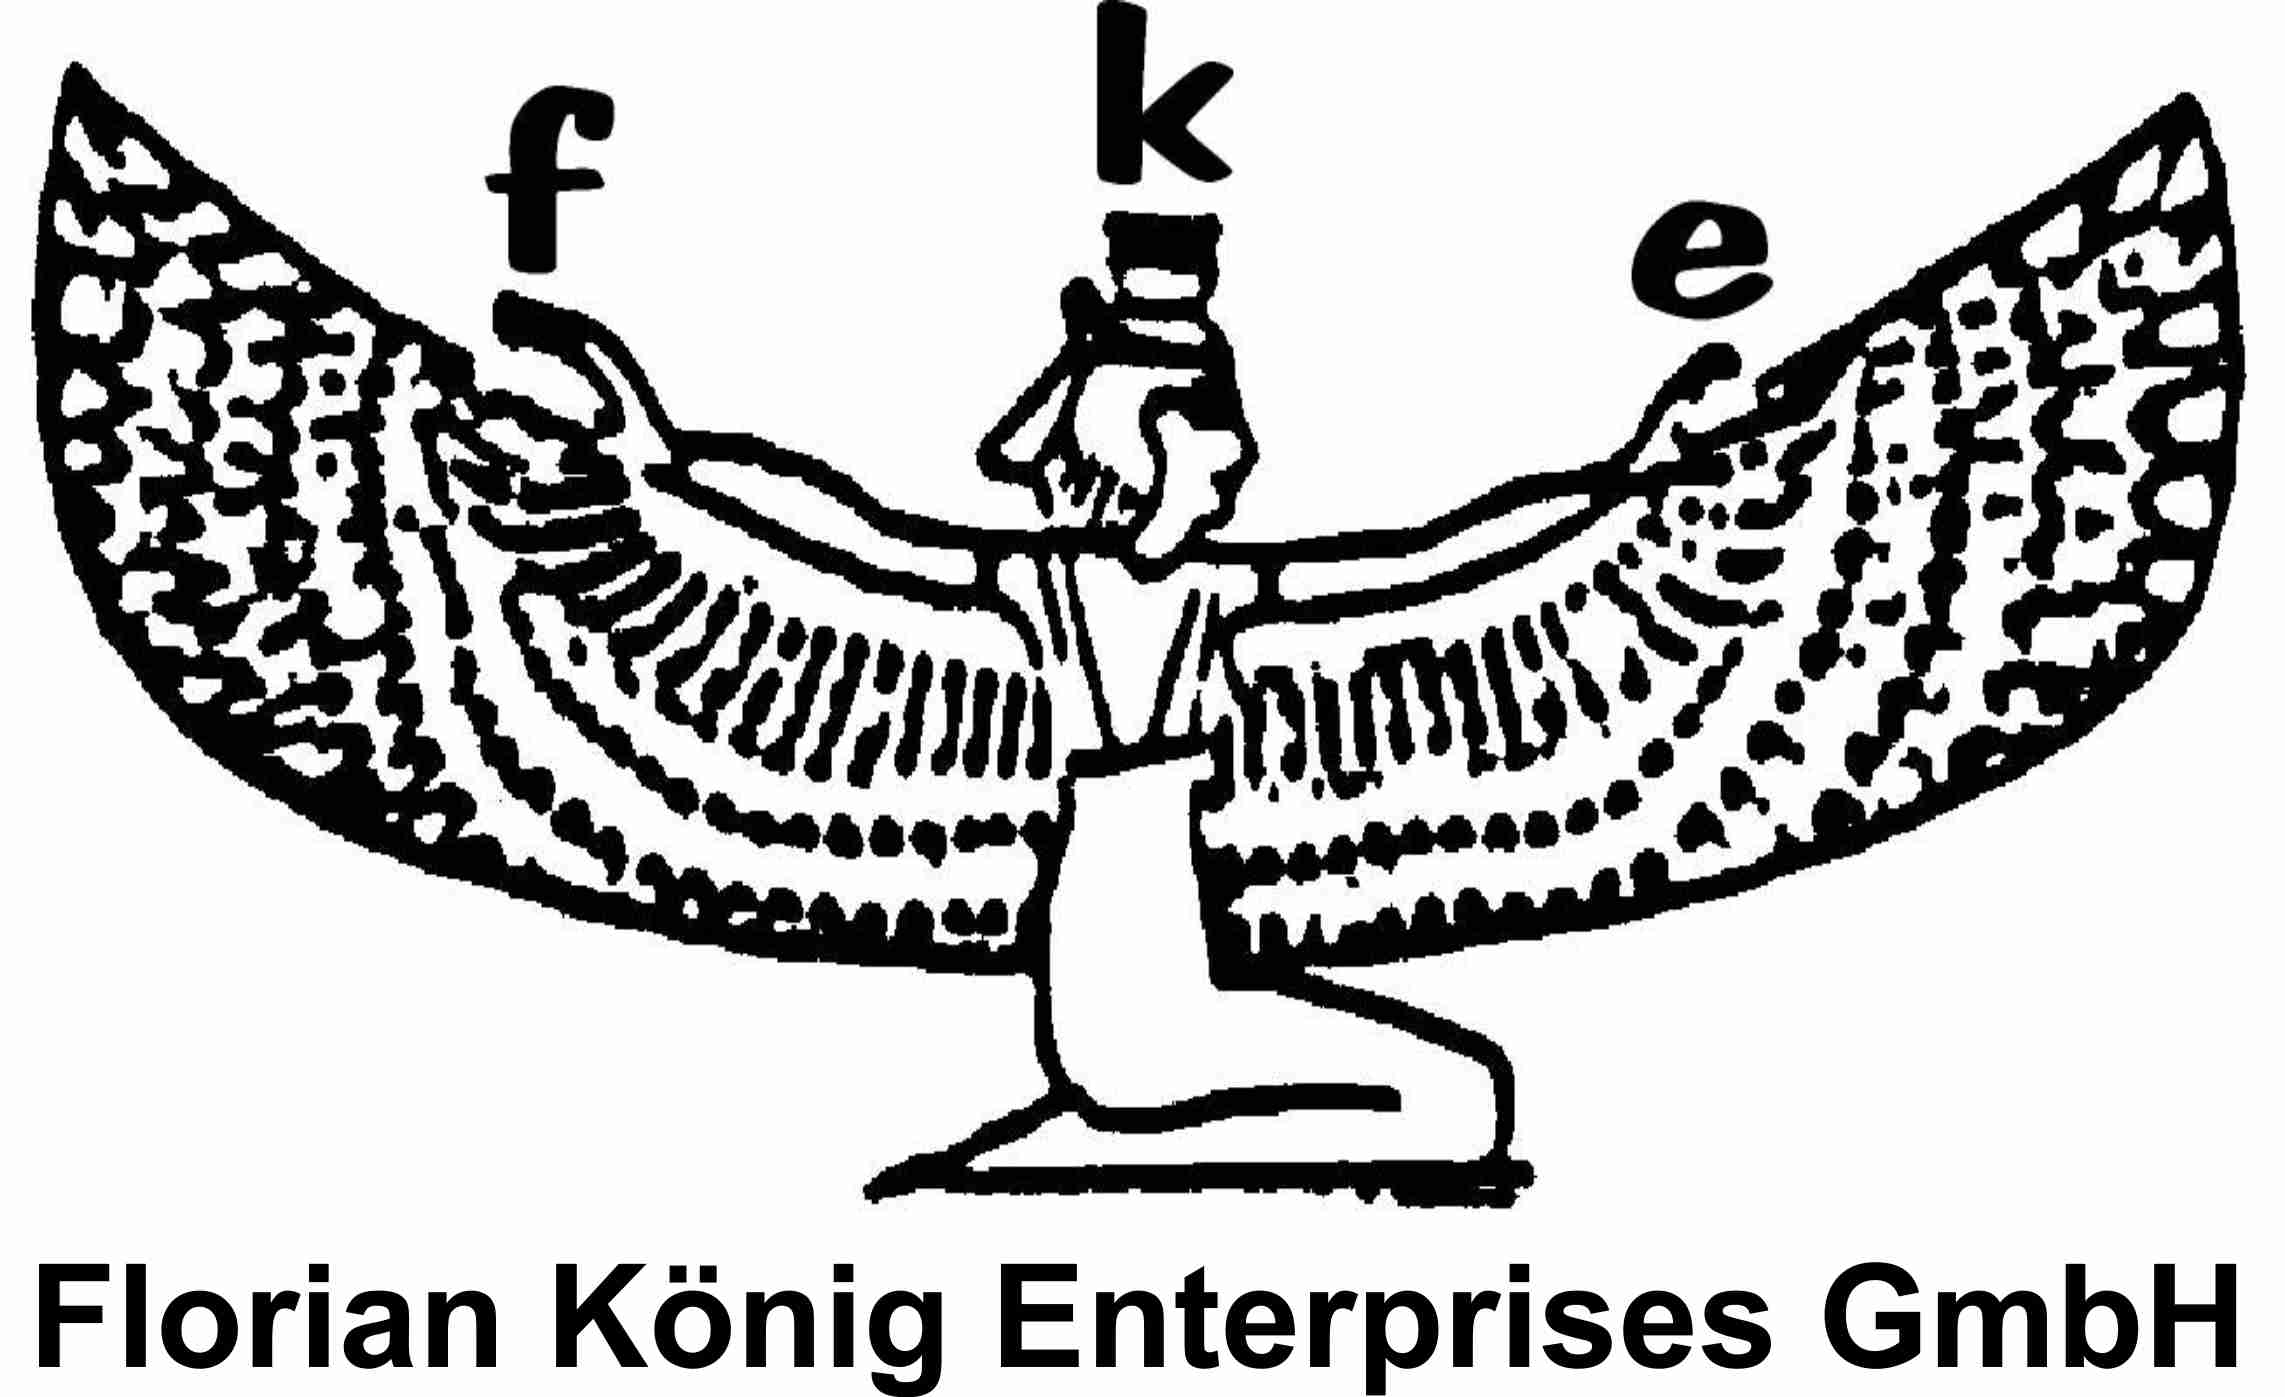 Copyright and trademarked FKE sign!